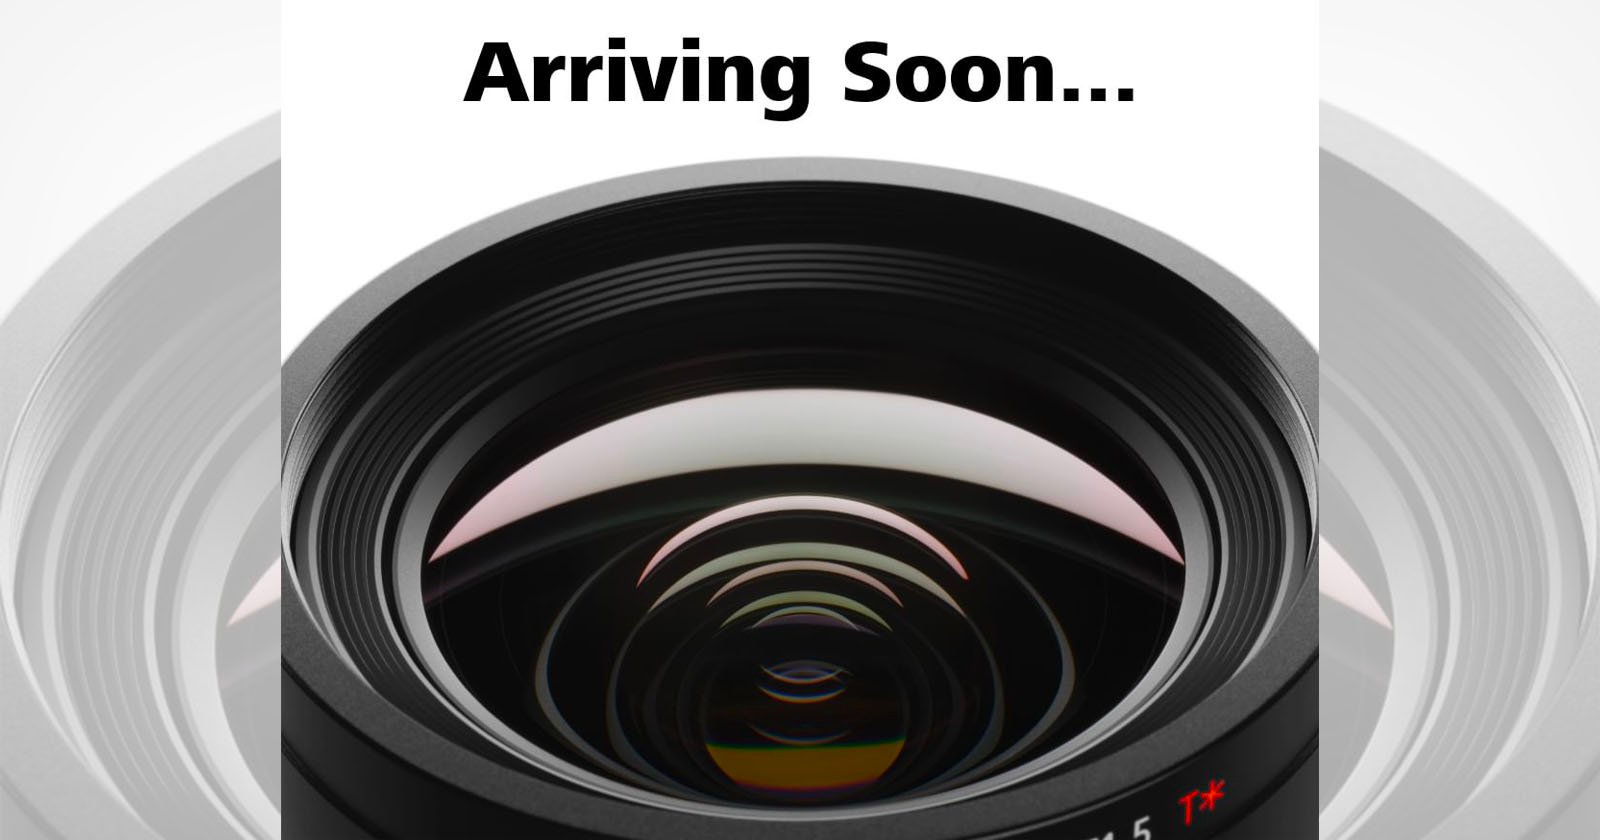 Zeiss Teases a New Lens: ‘Arriving Soon’ and ‘Approaching Fast’